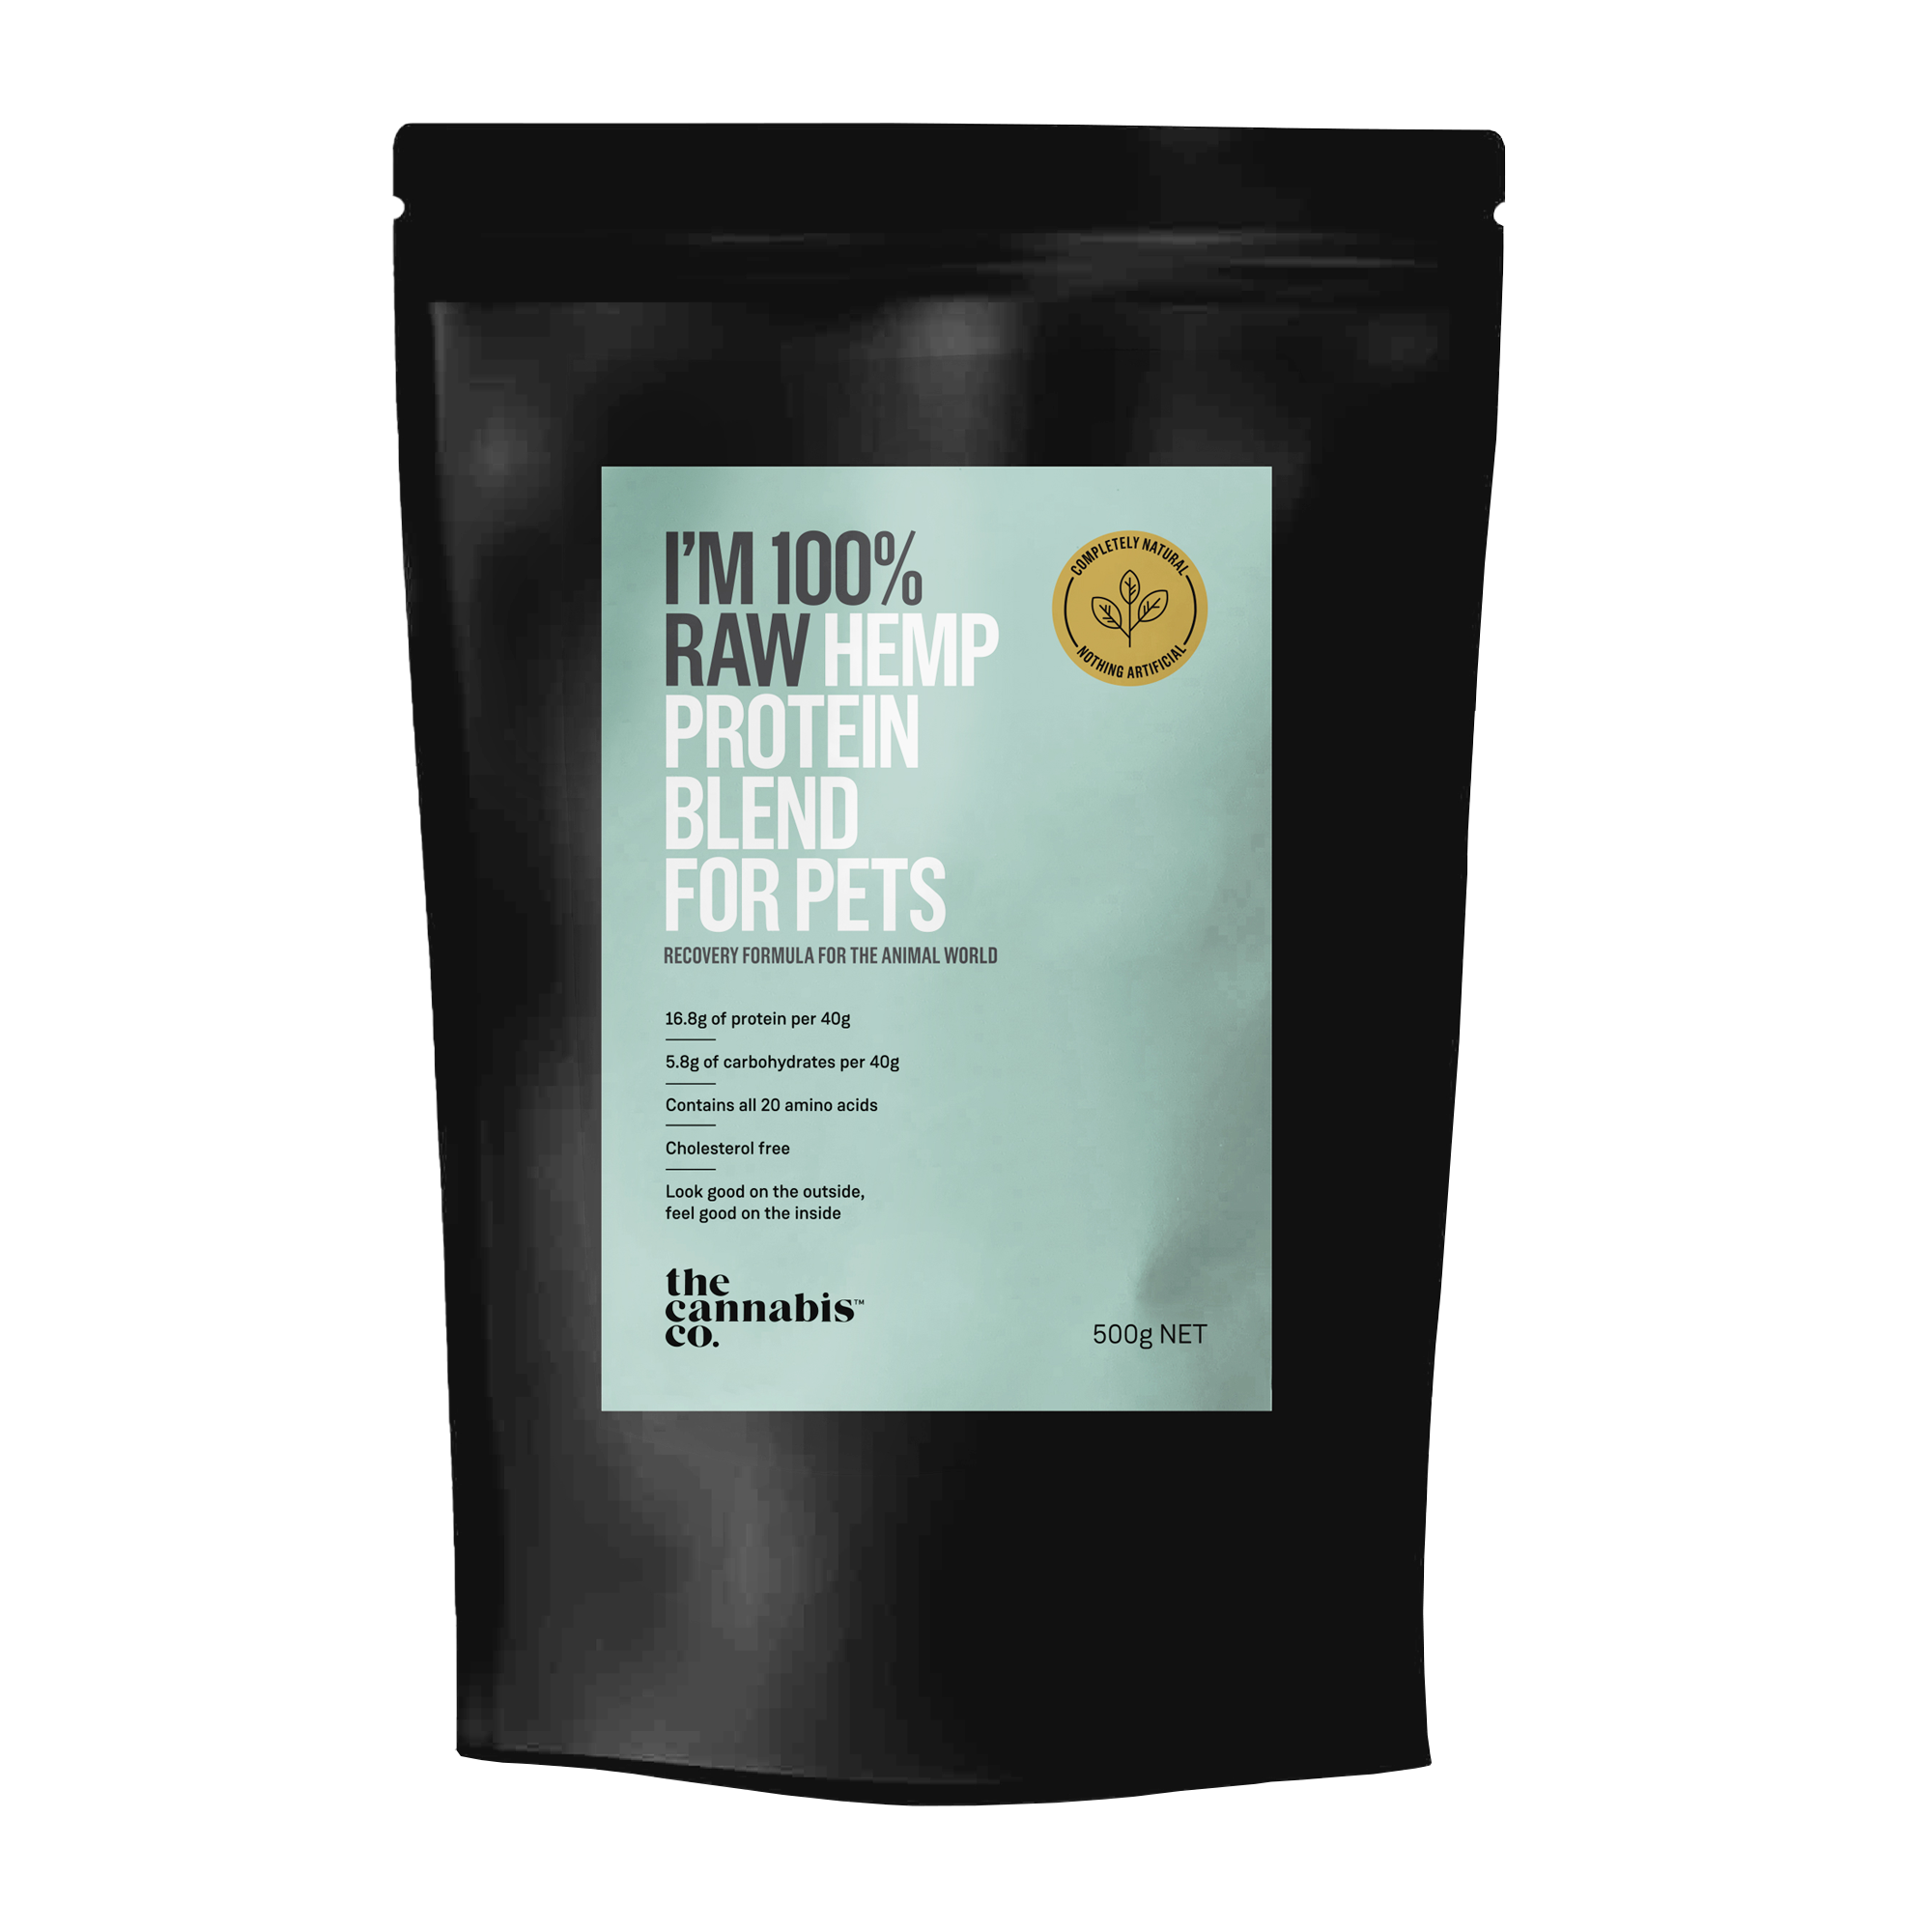 100% Raw Hemp Protein Blend for Pets 500g